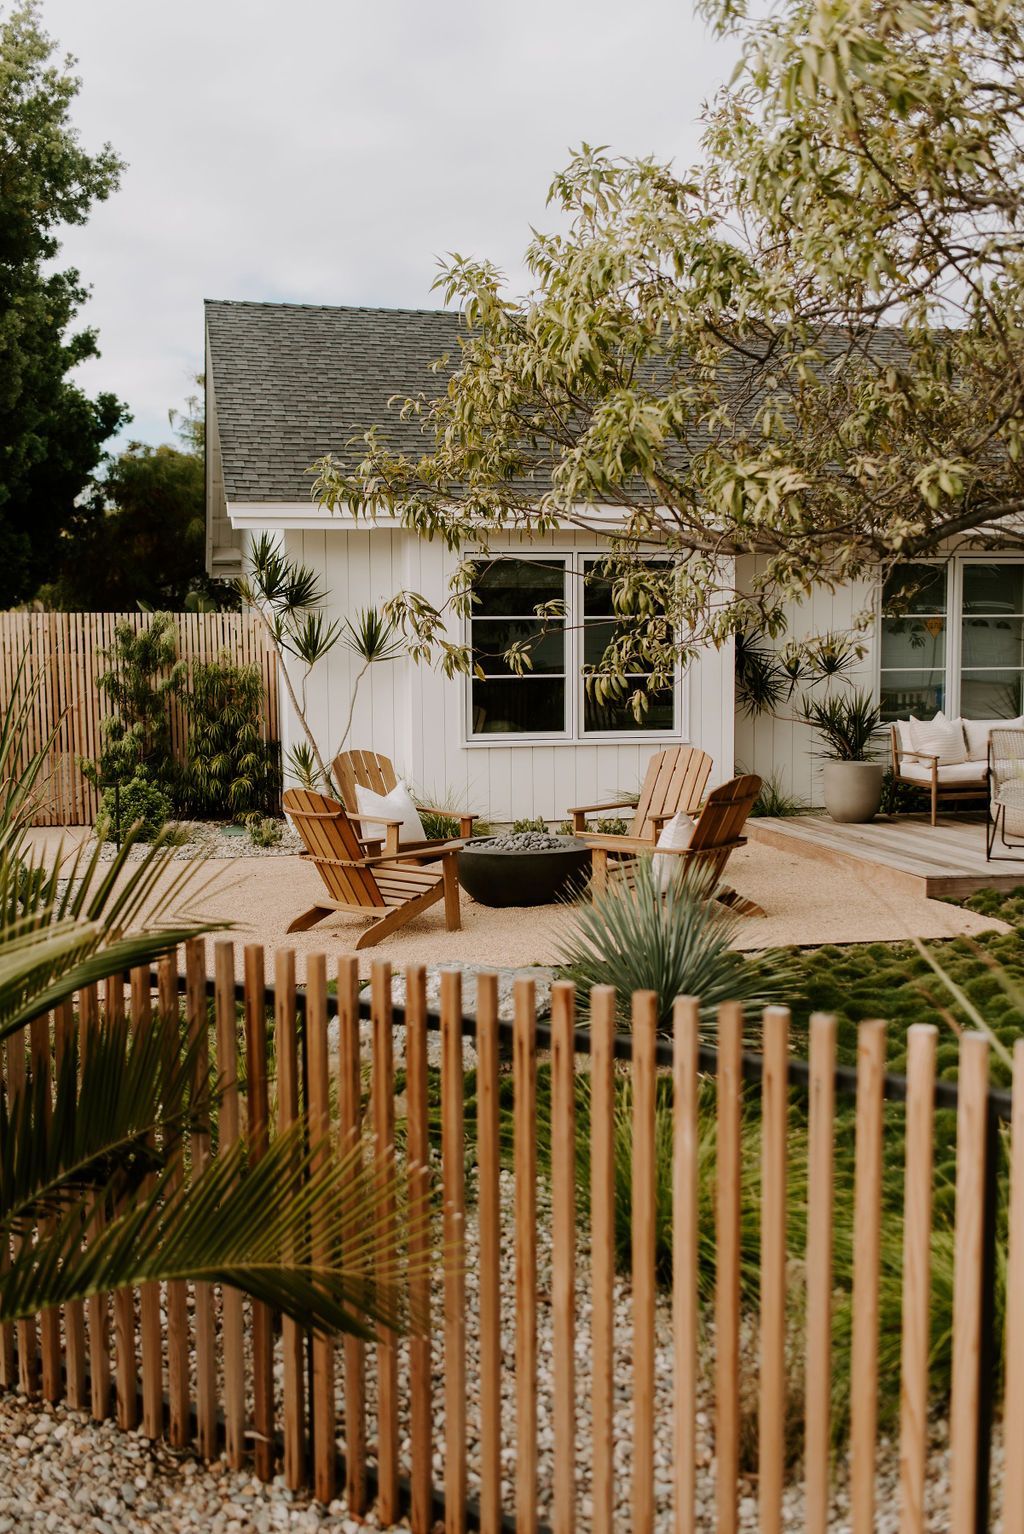 Charming And Cool Front Yard Landscape